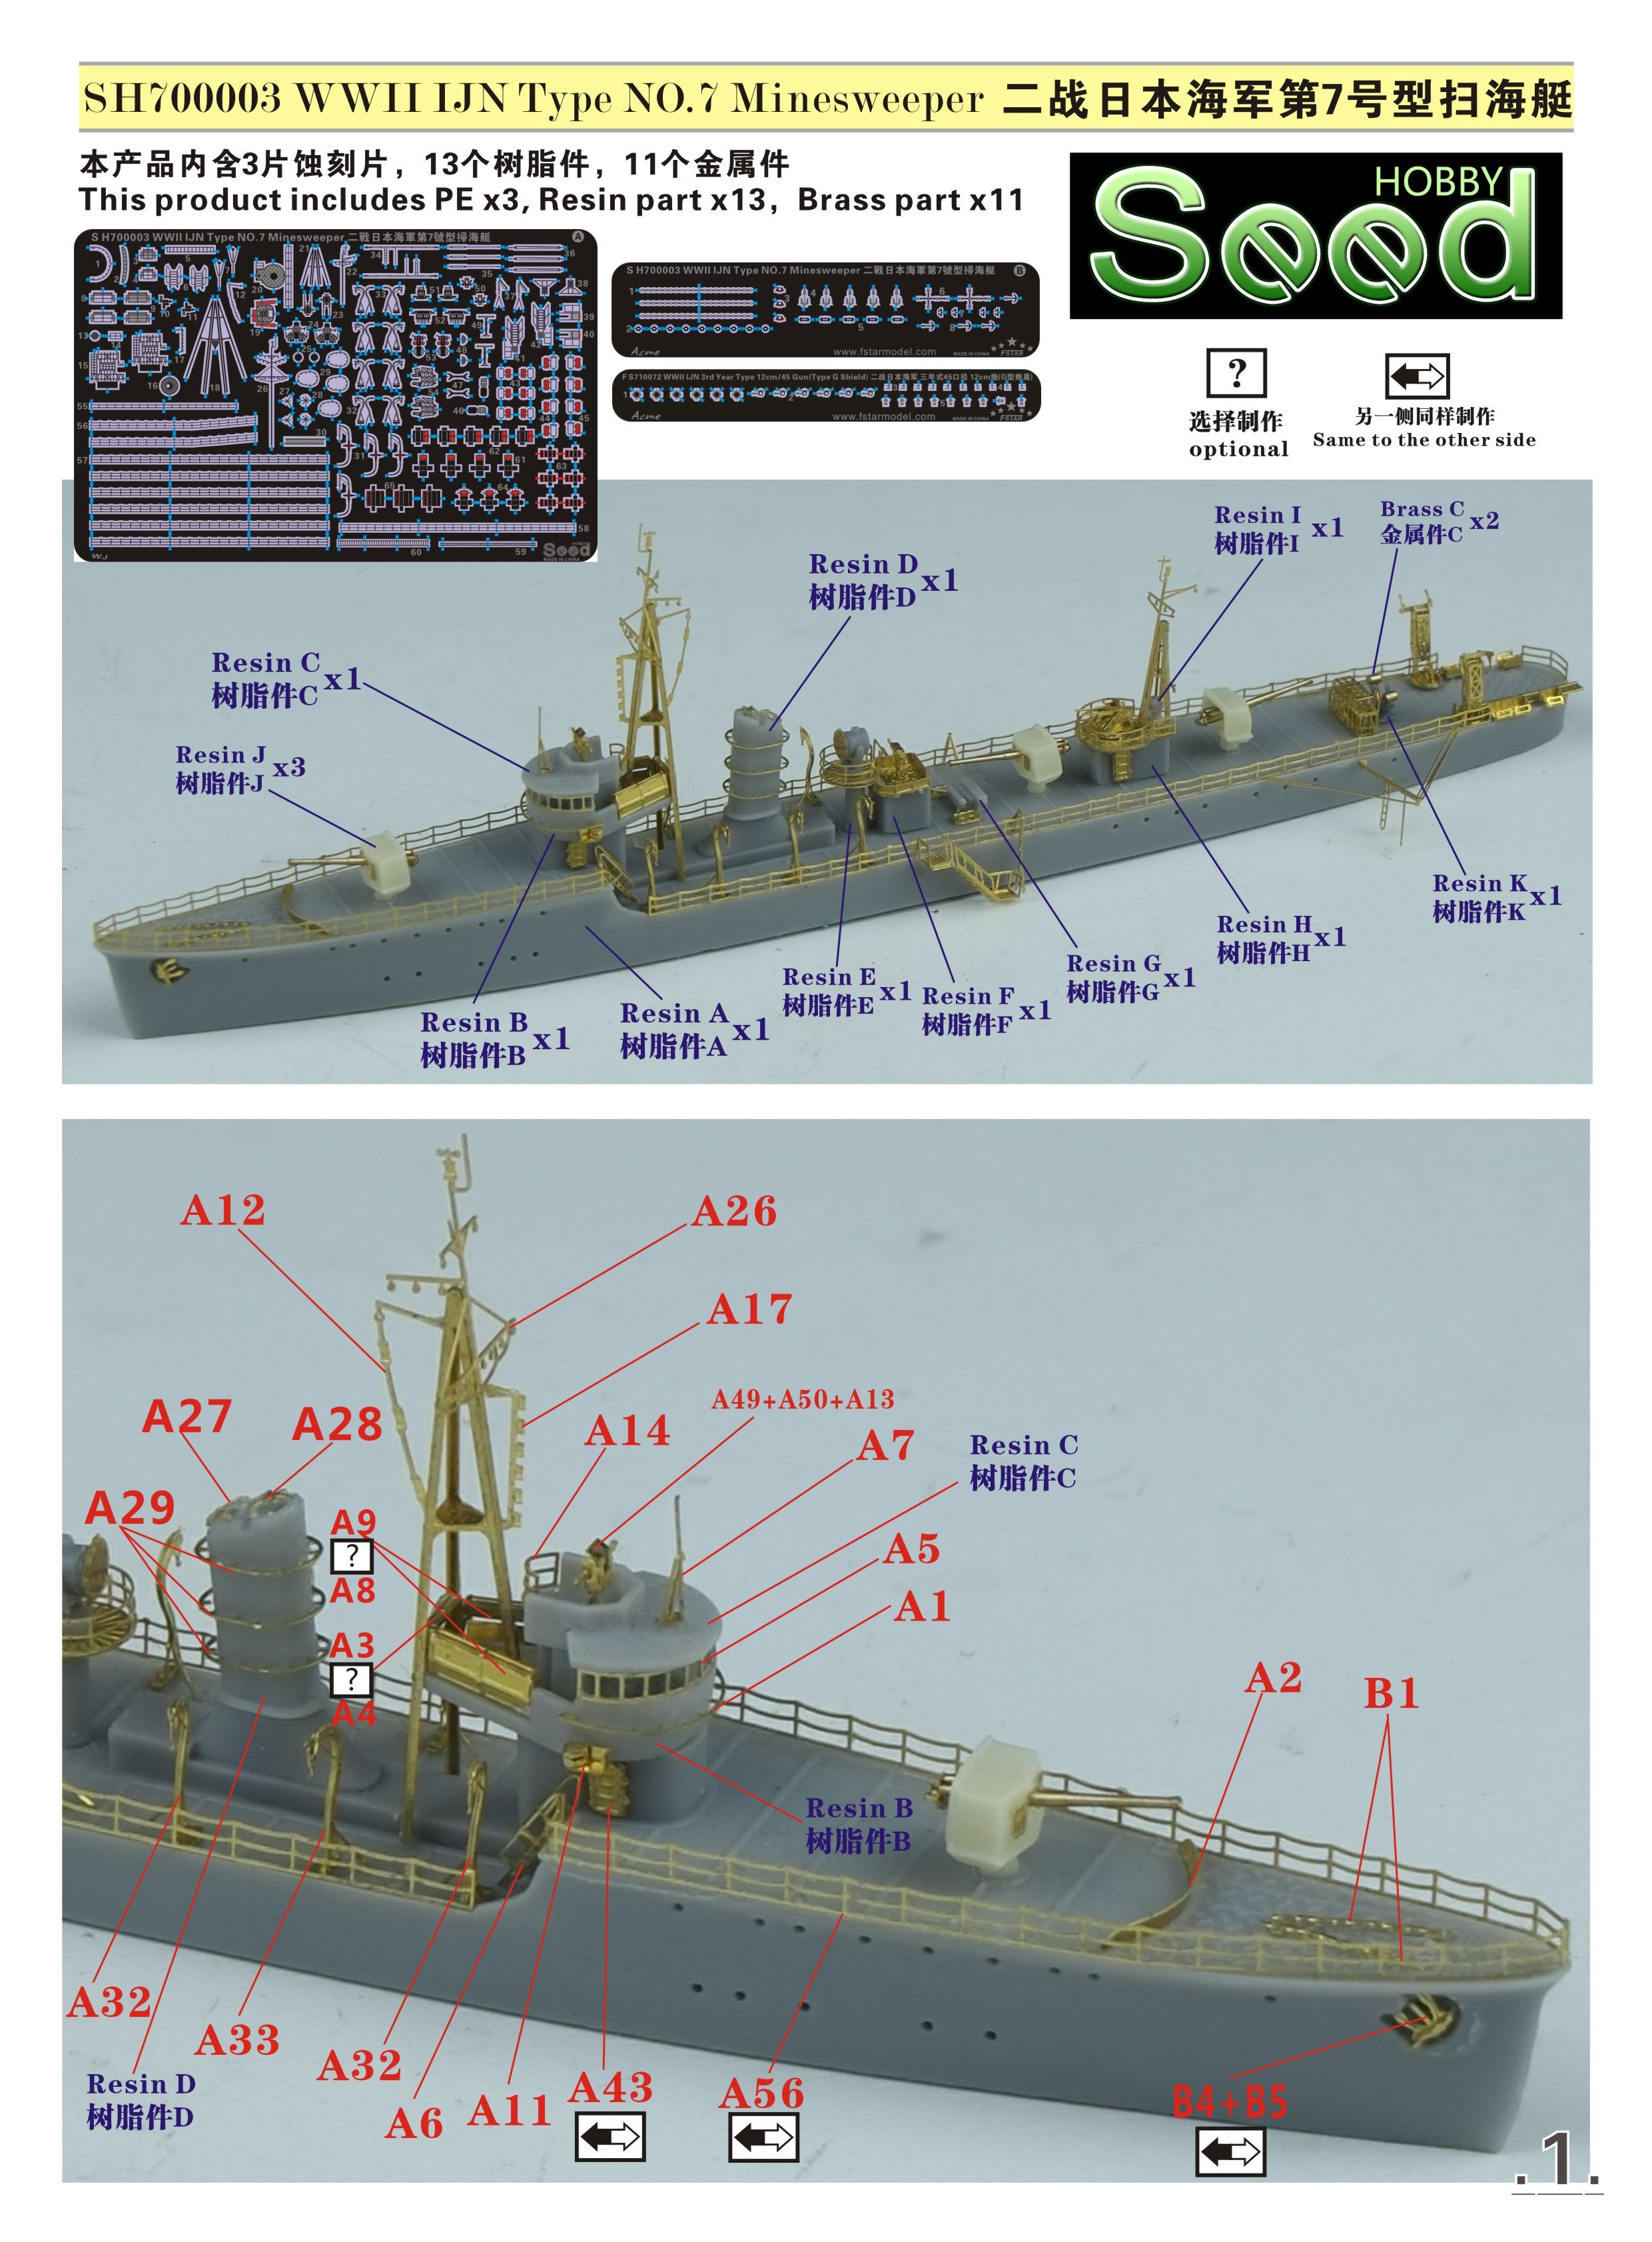 1/700 WWII IJN Type No.7 Minesweeper Resin Kit - Click Image to Close